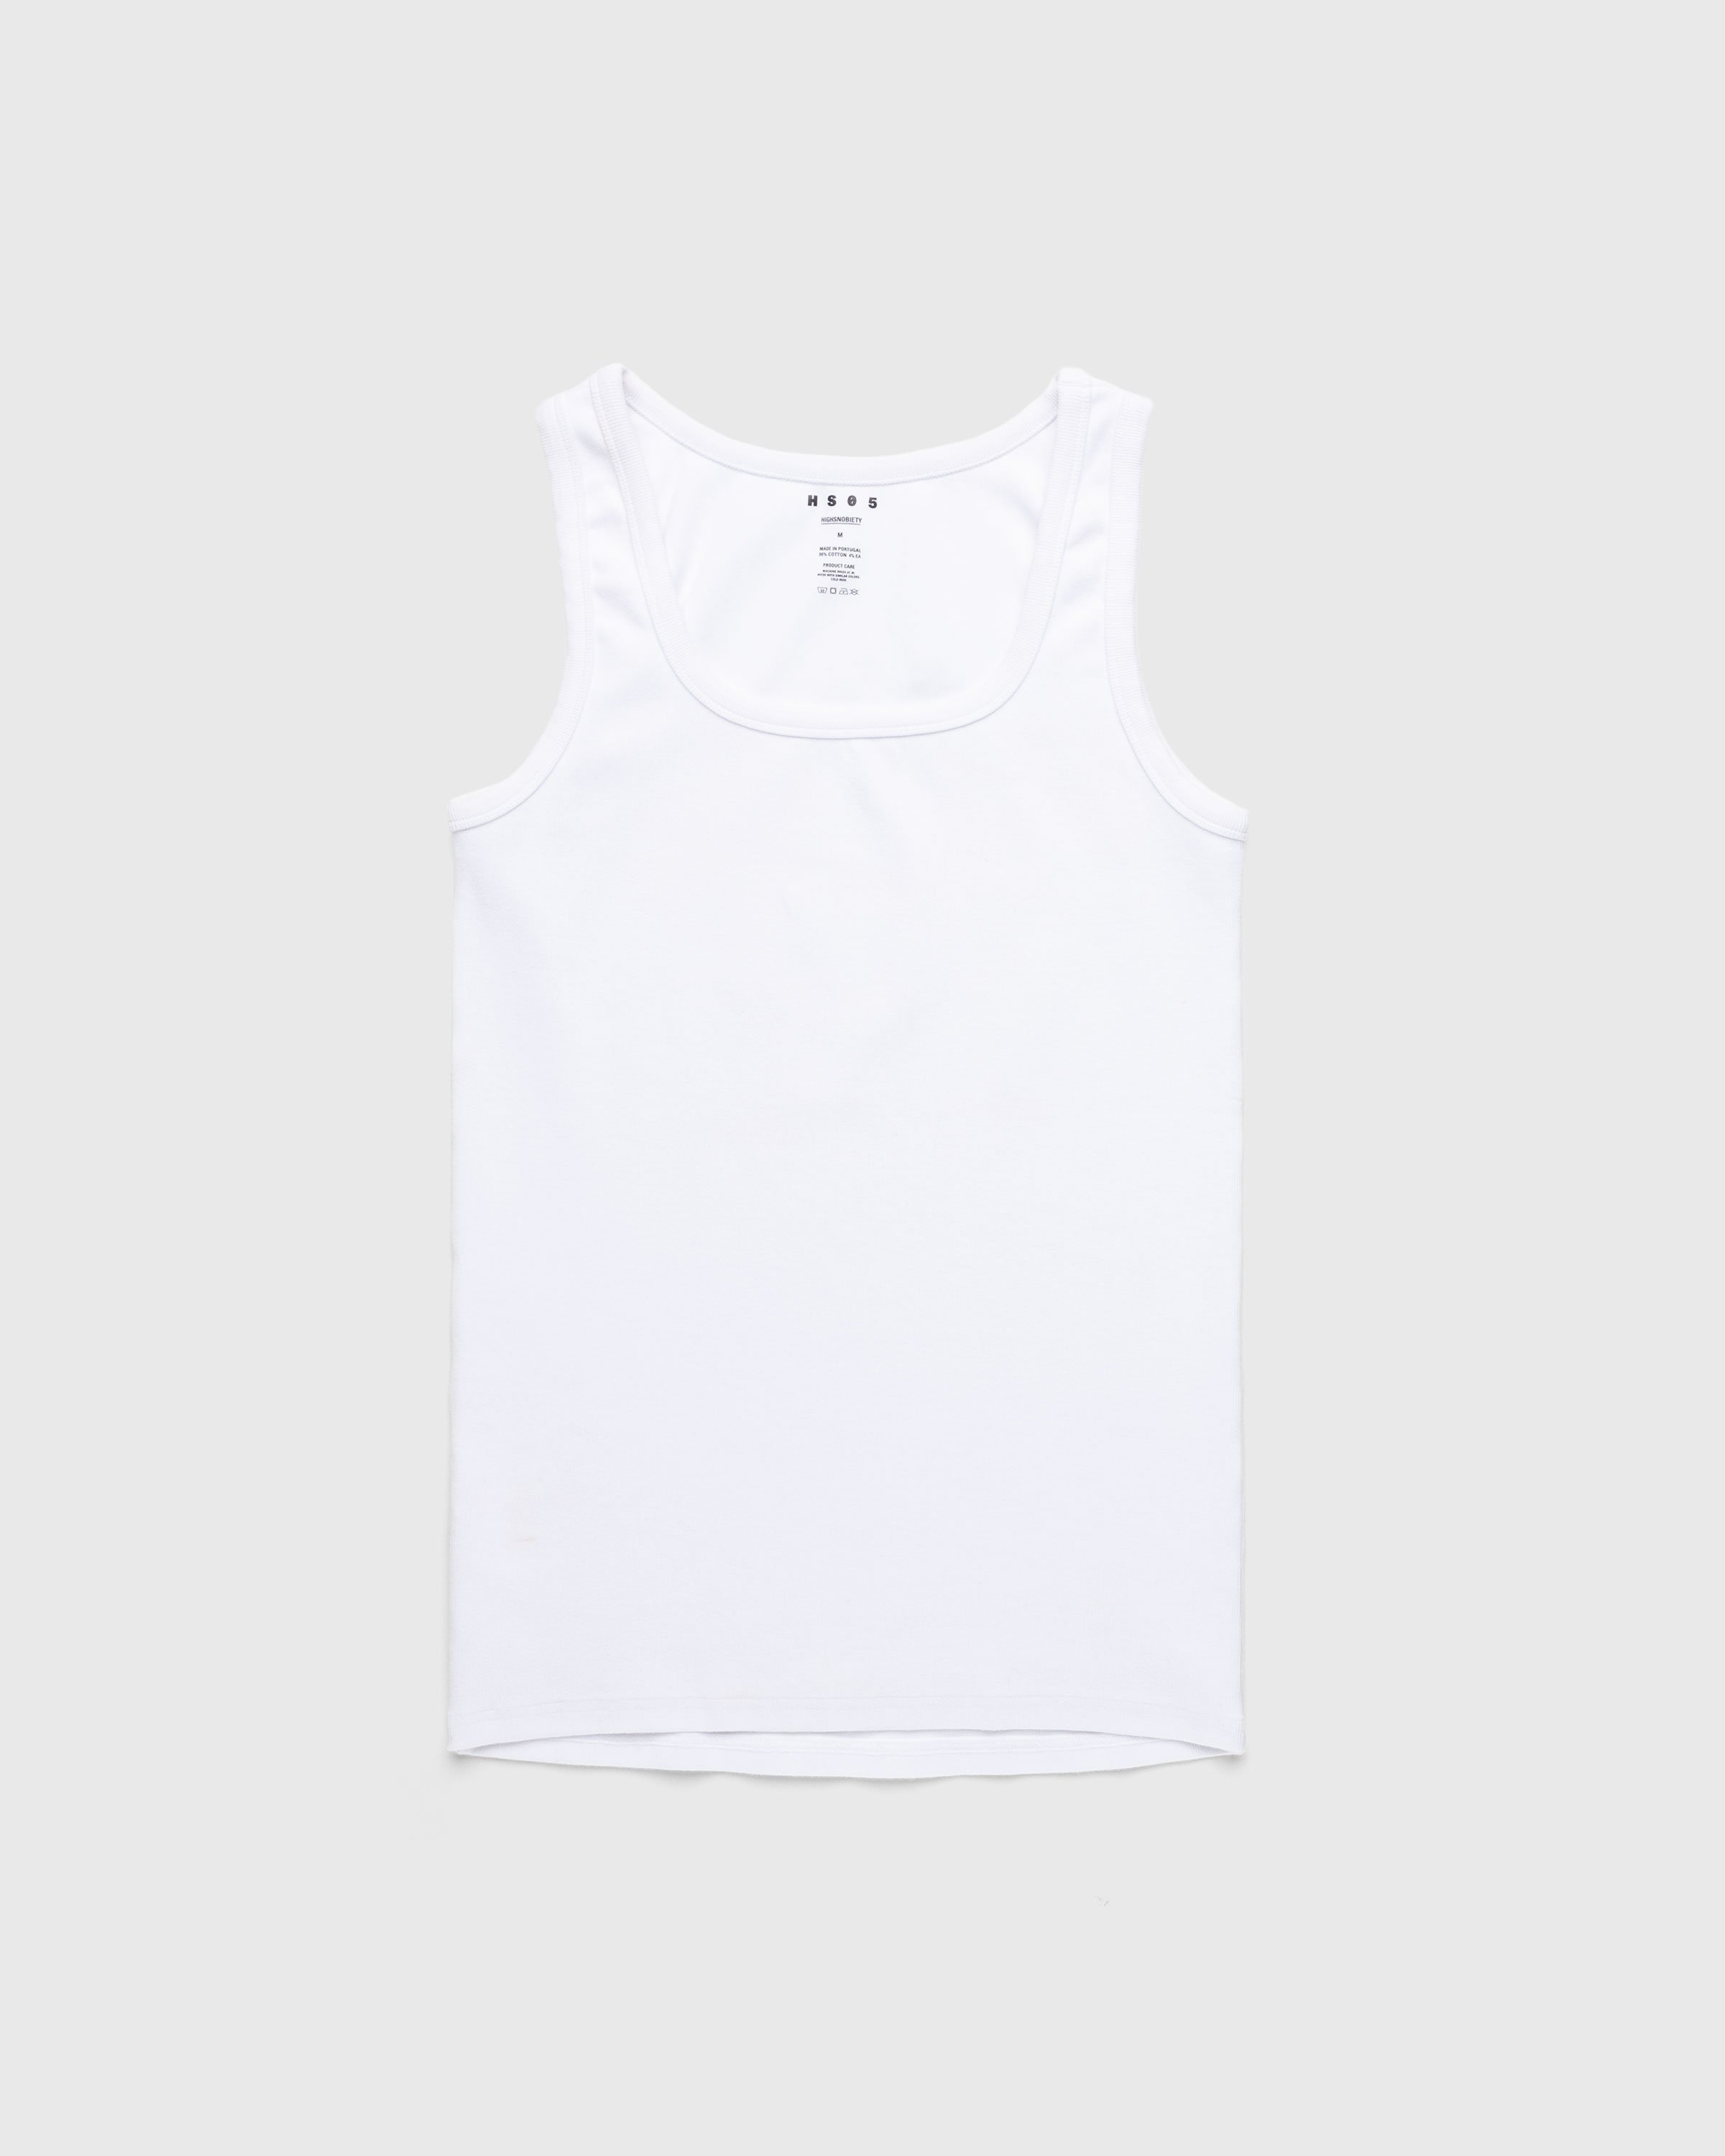 Highsnobiety HS05 - 3 Pack Tank Top White - Clothing - White - Image 2